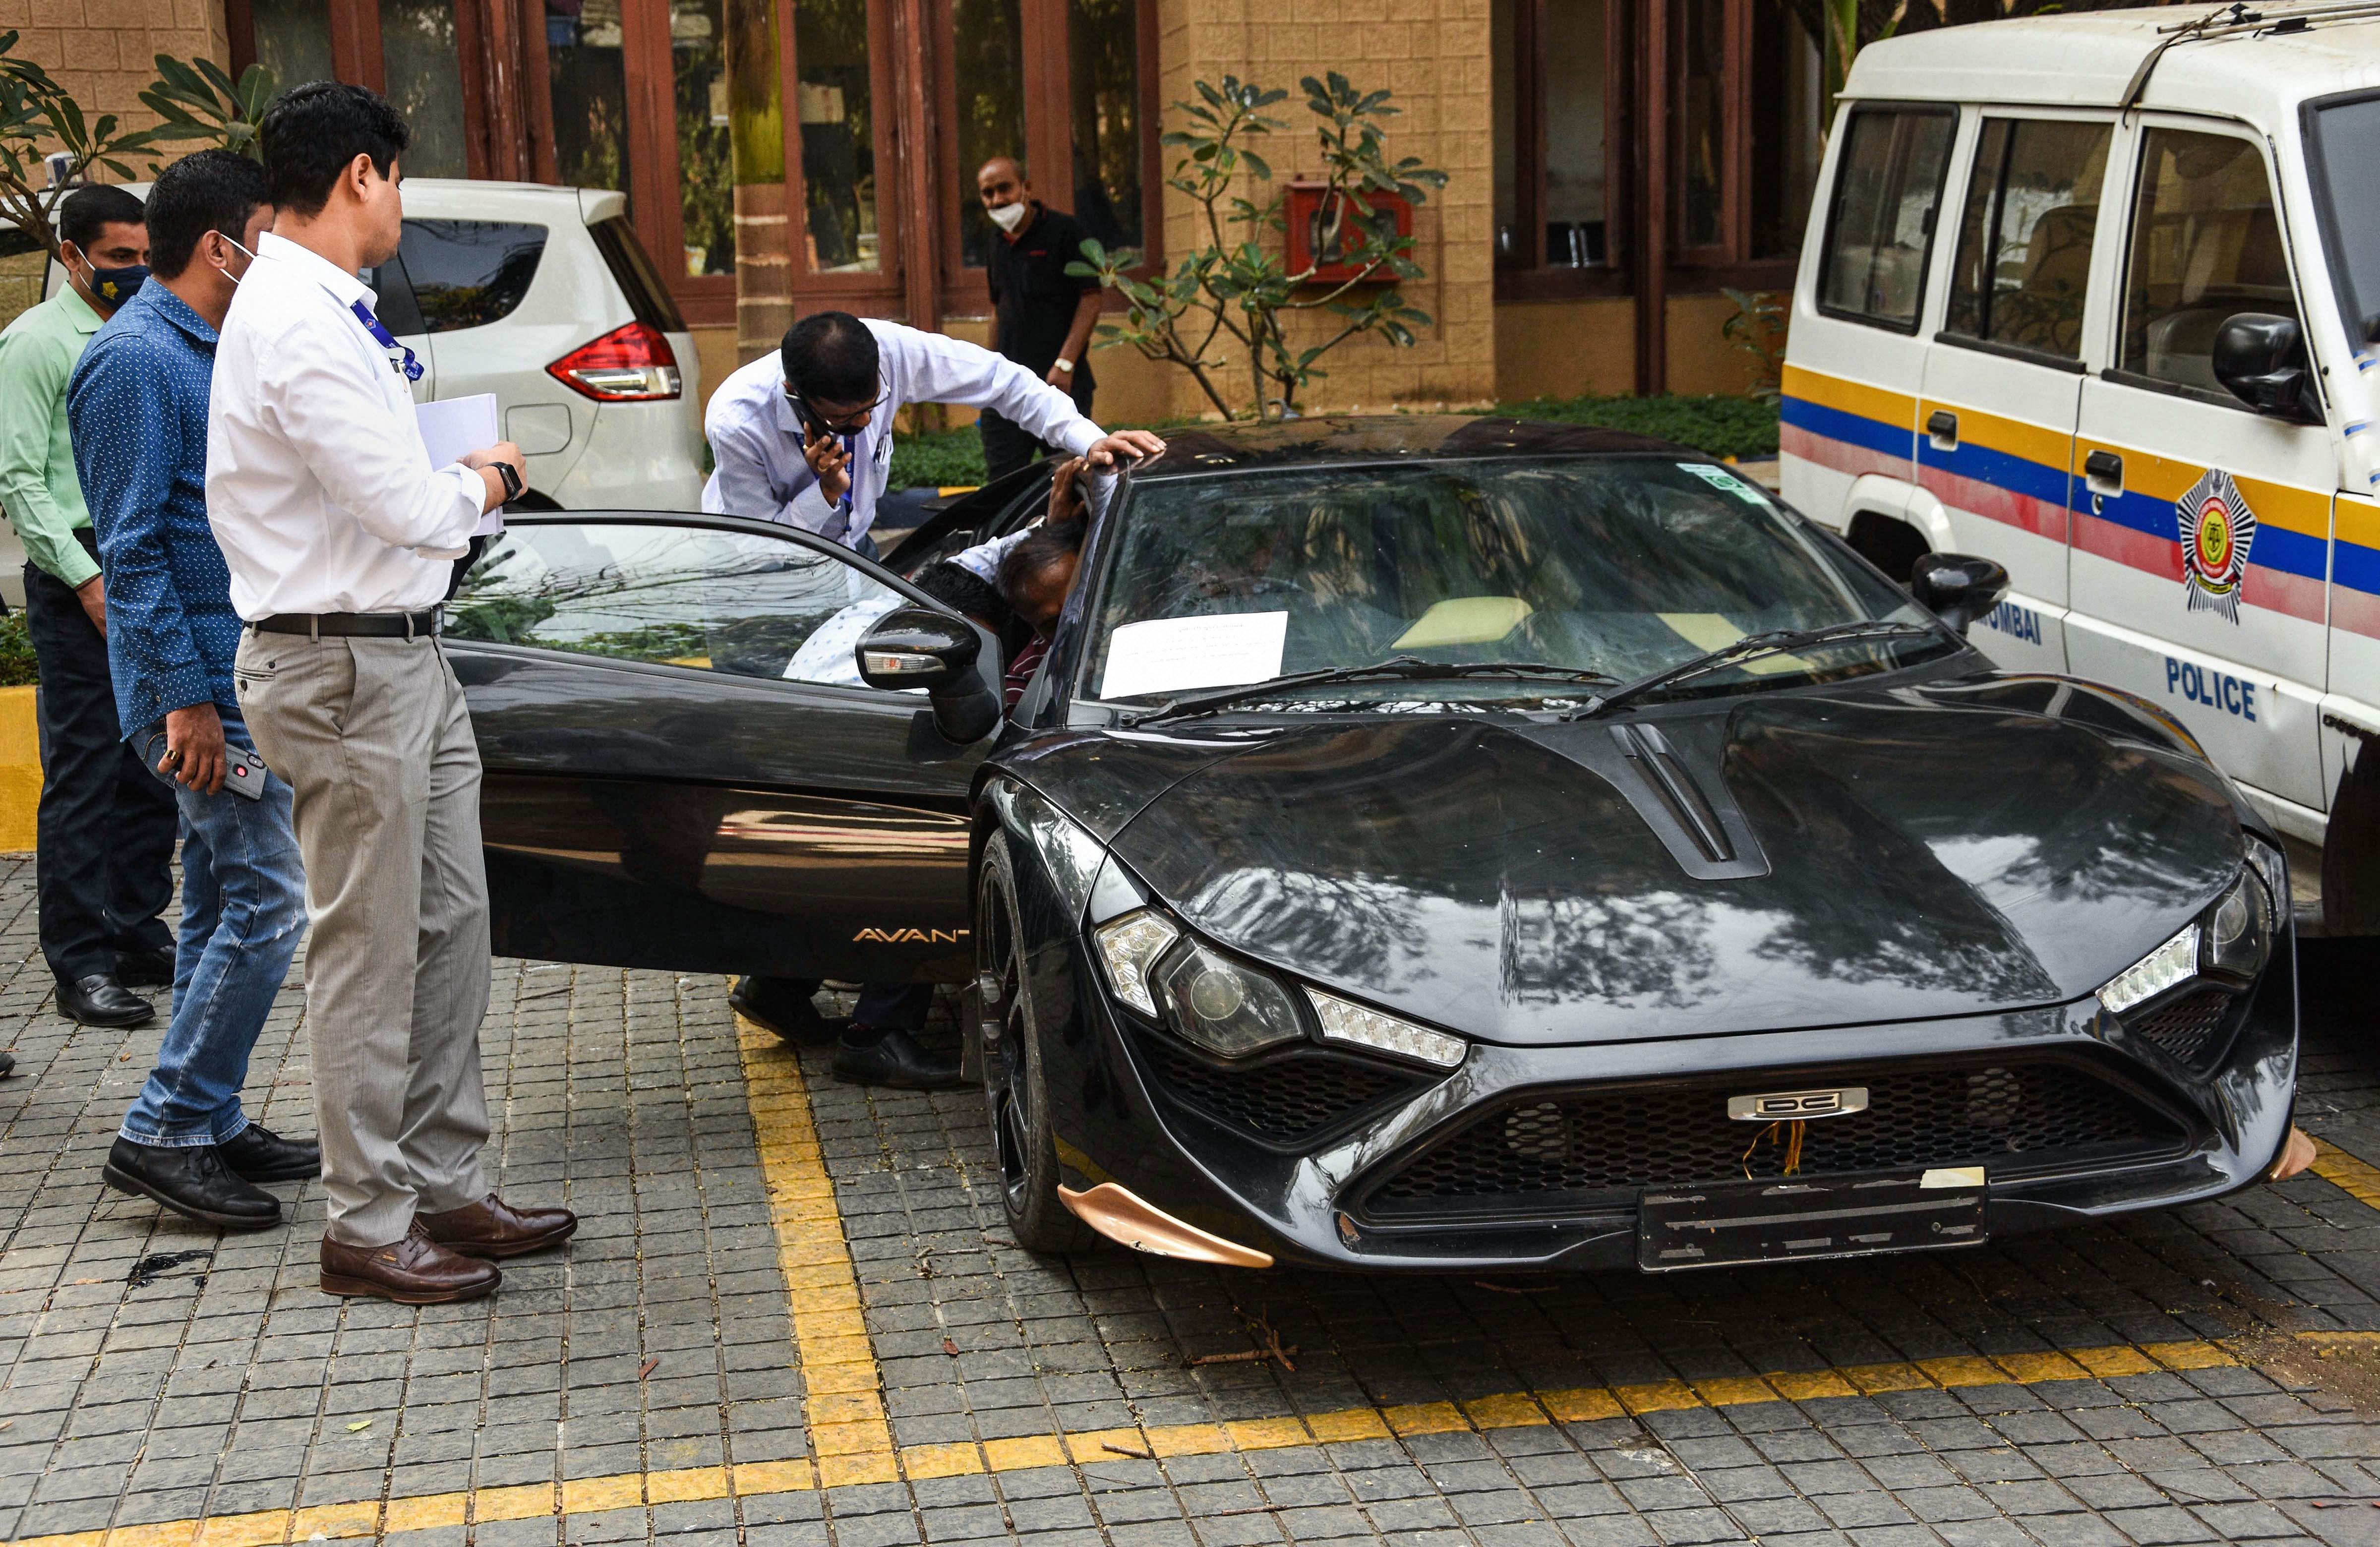 Police personnel investigate the seized Avanti car of renowned car designer Dilip Chhabria after he was produced at Killa court in connection with cheating and forgery case, in Mumbai, Tuesday, Dec. 29, 2020. Credit: PTI Photo